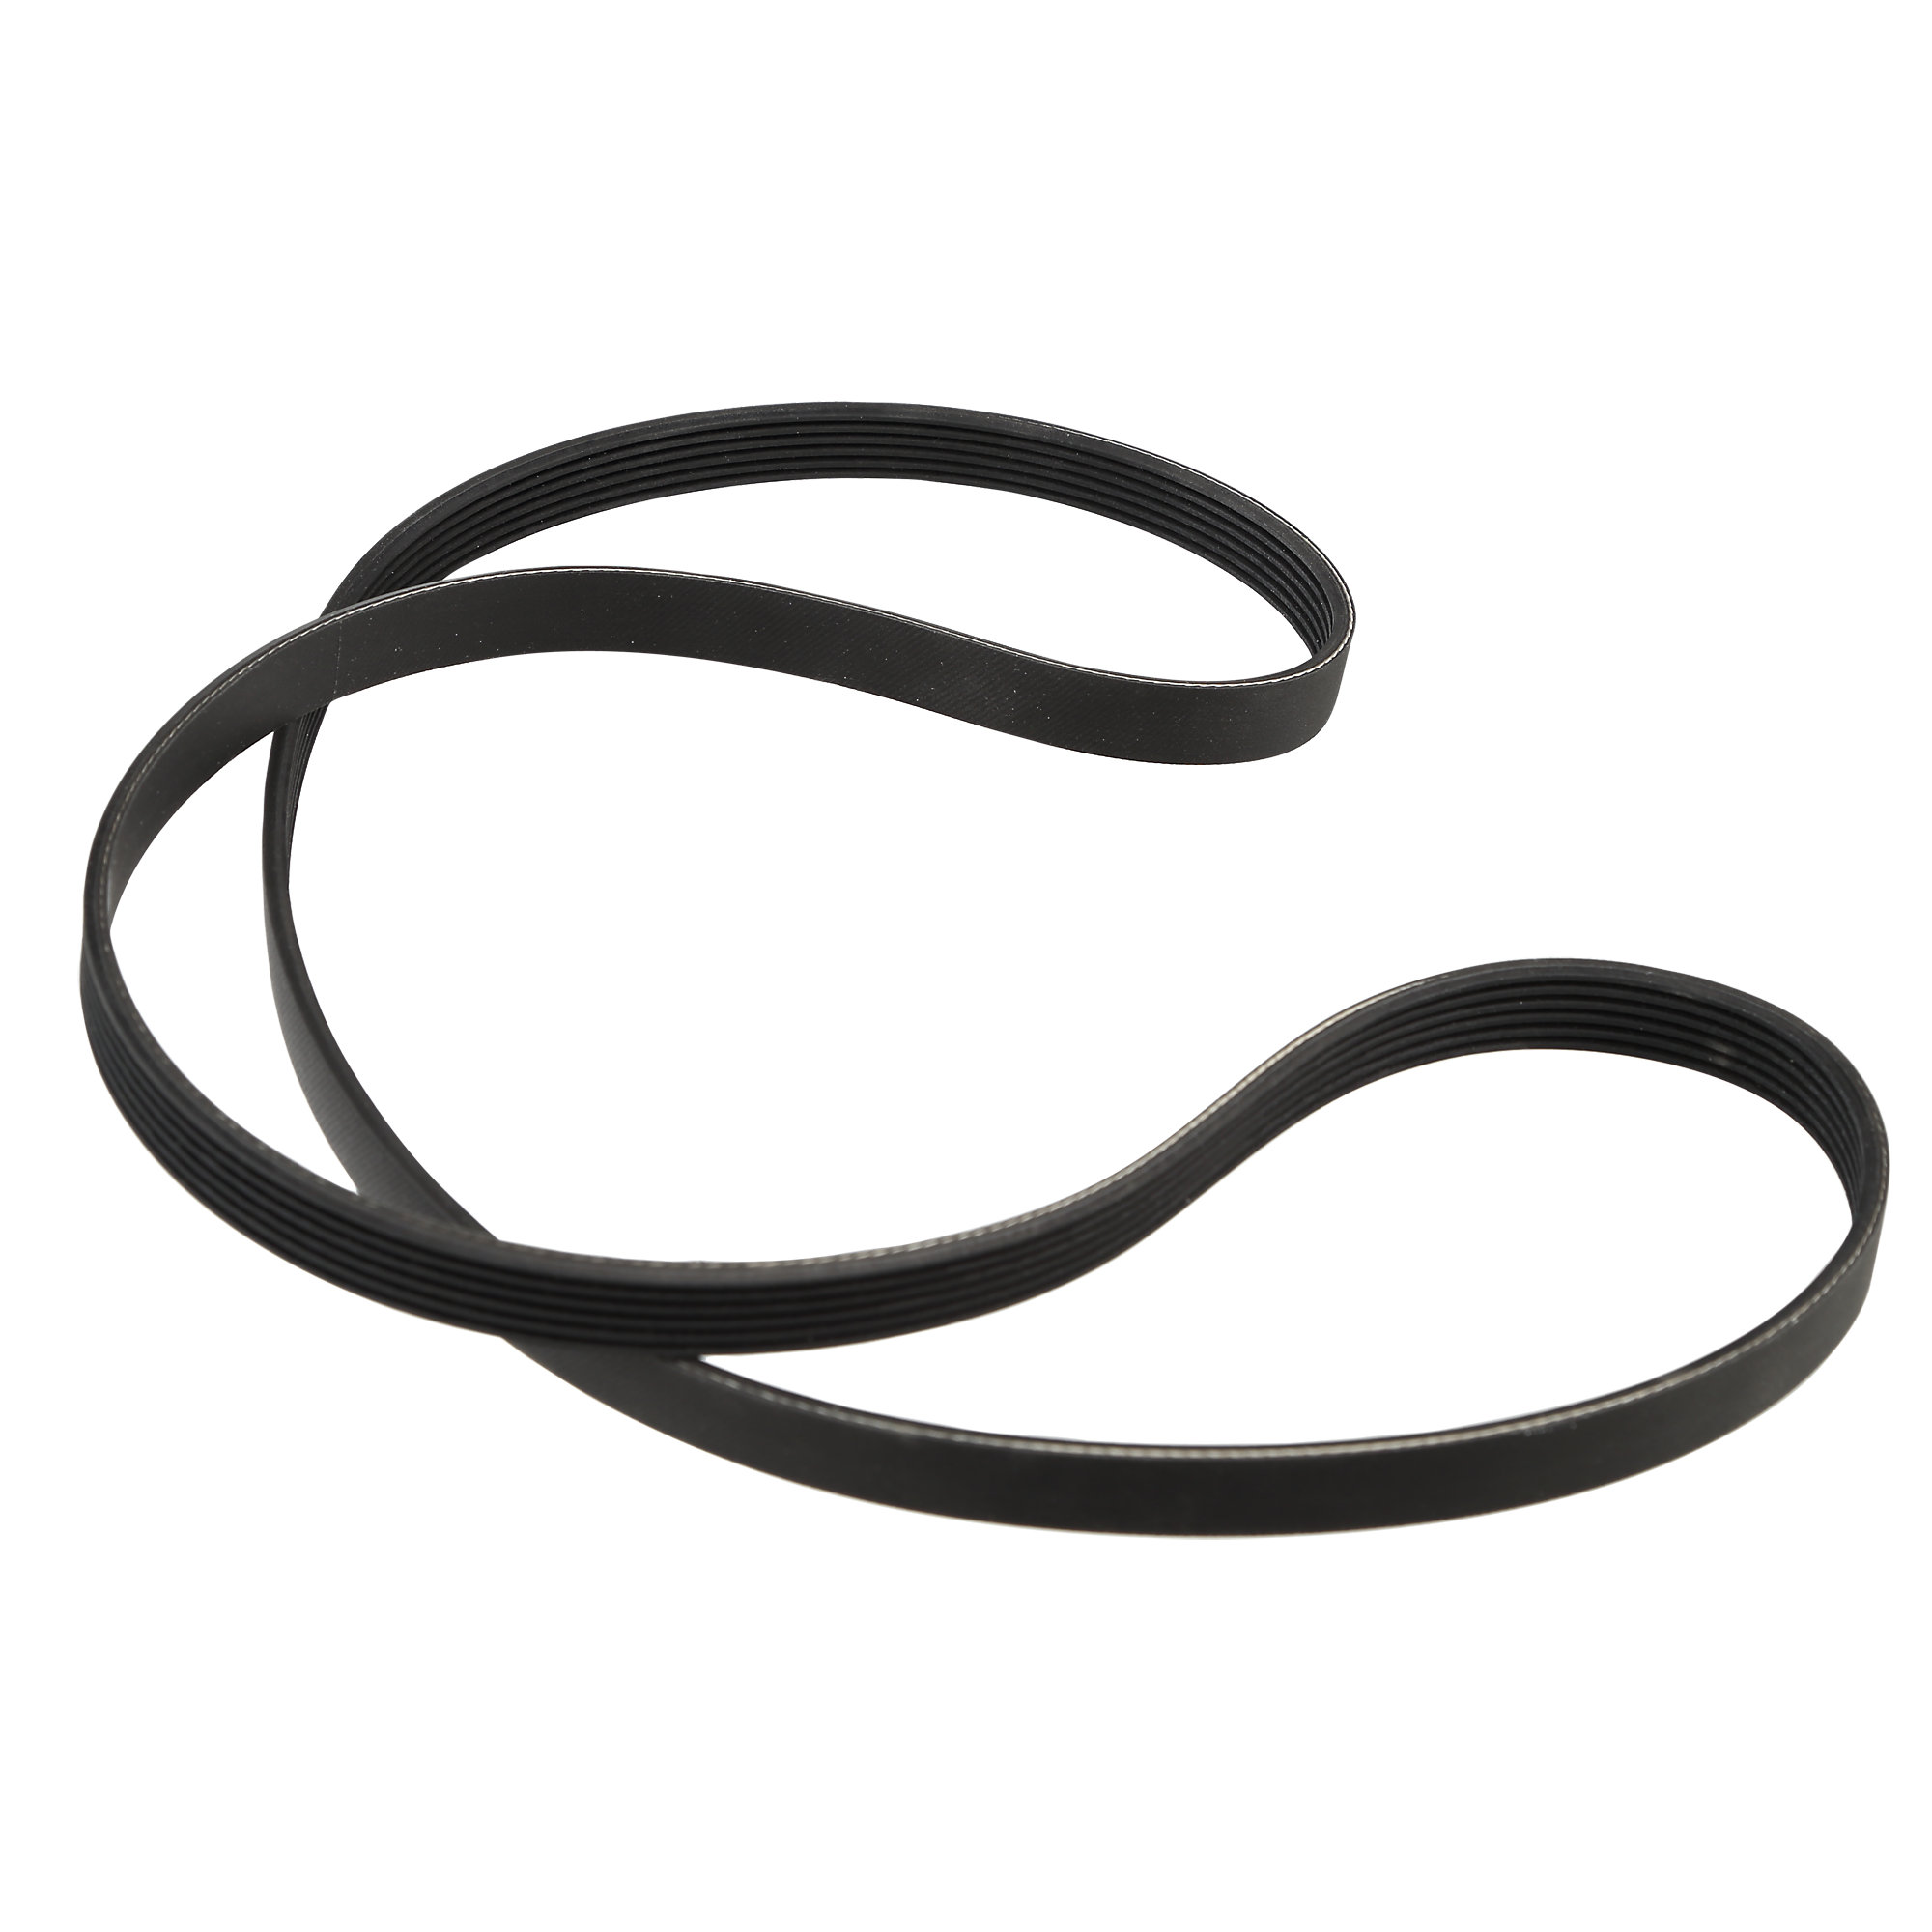 Drive Belt for certain NordicTrack and ProForm Machines